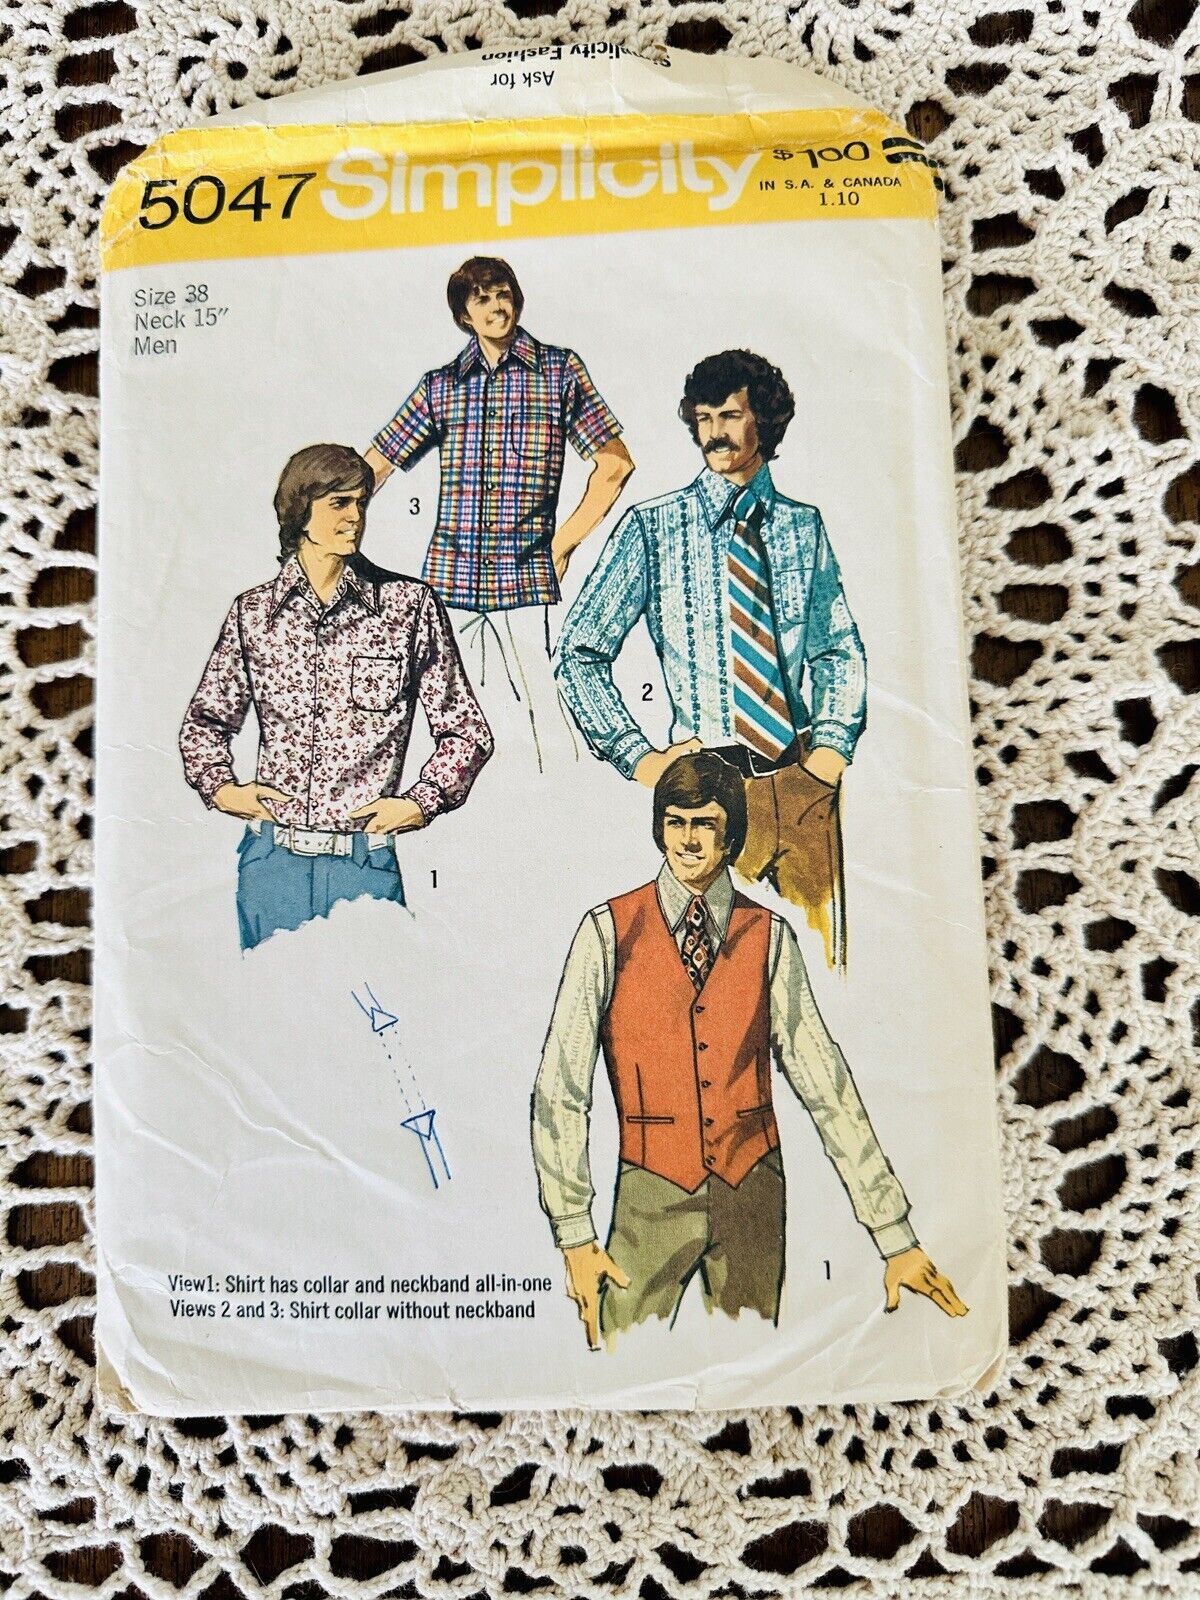 Vintage 70’s Men’s Sewing Patterns Shirts Size 38 Neck 15” Simplicity Easy Instr